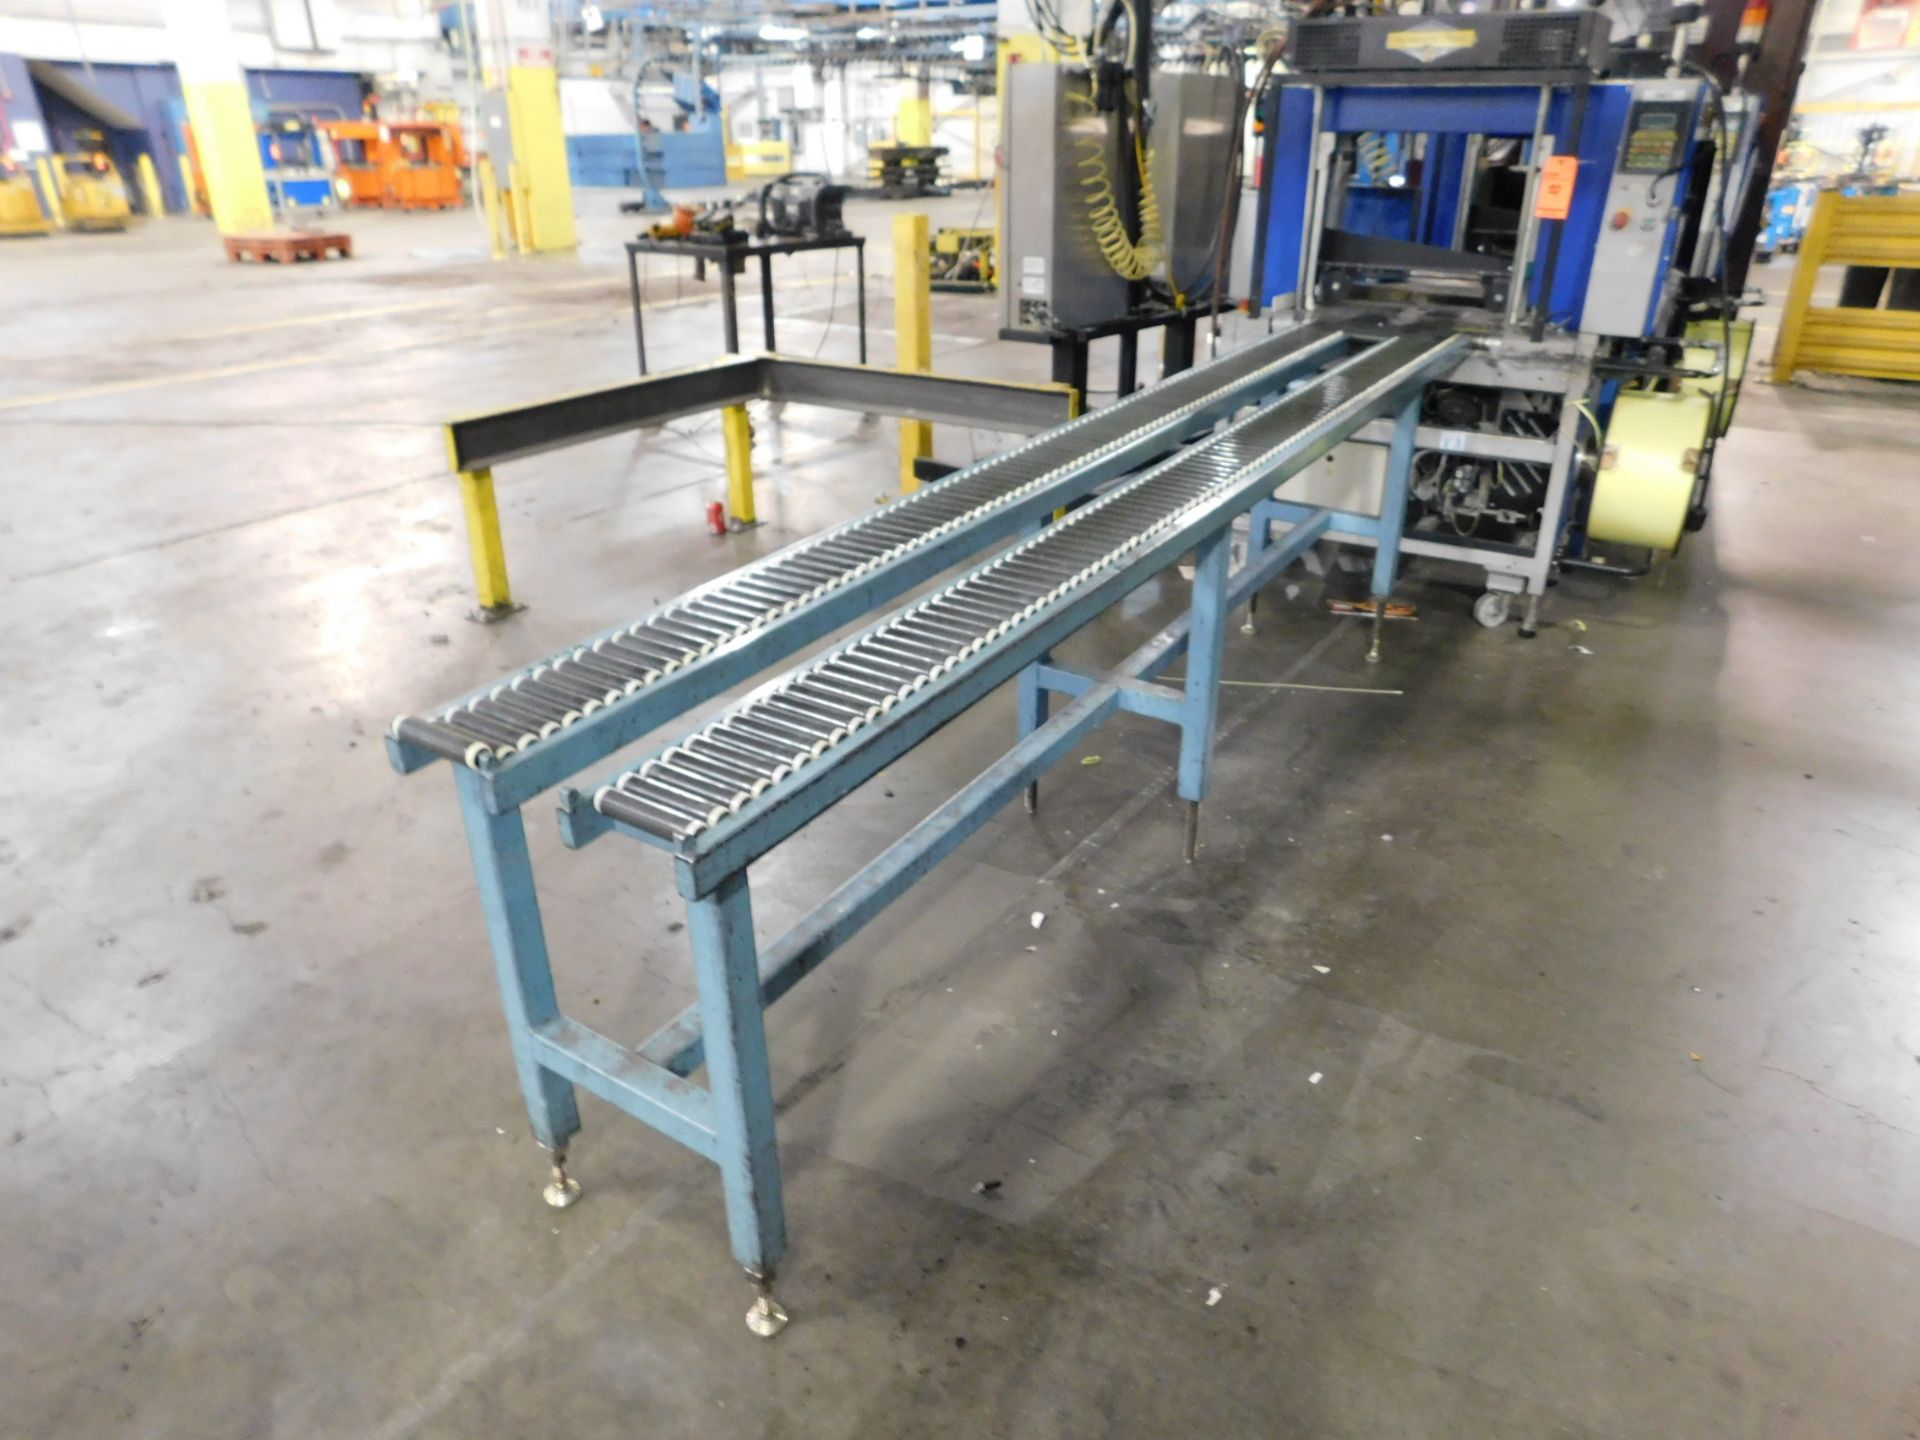 2002 Dynark banding machine with discharge roller conveyor, 10 ft. long by 18 in. wide, asset # - Image 2 of 2